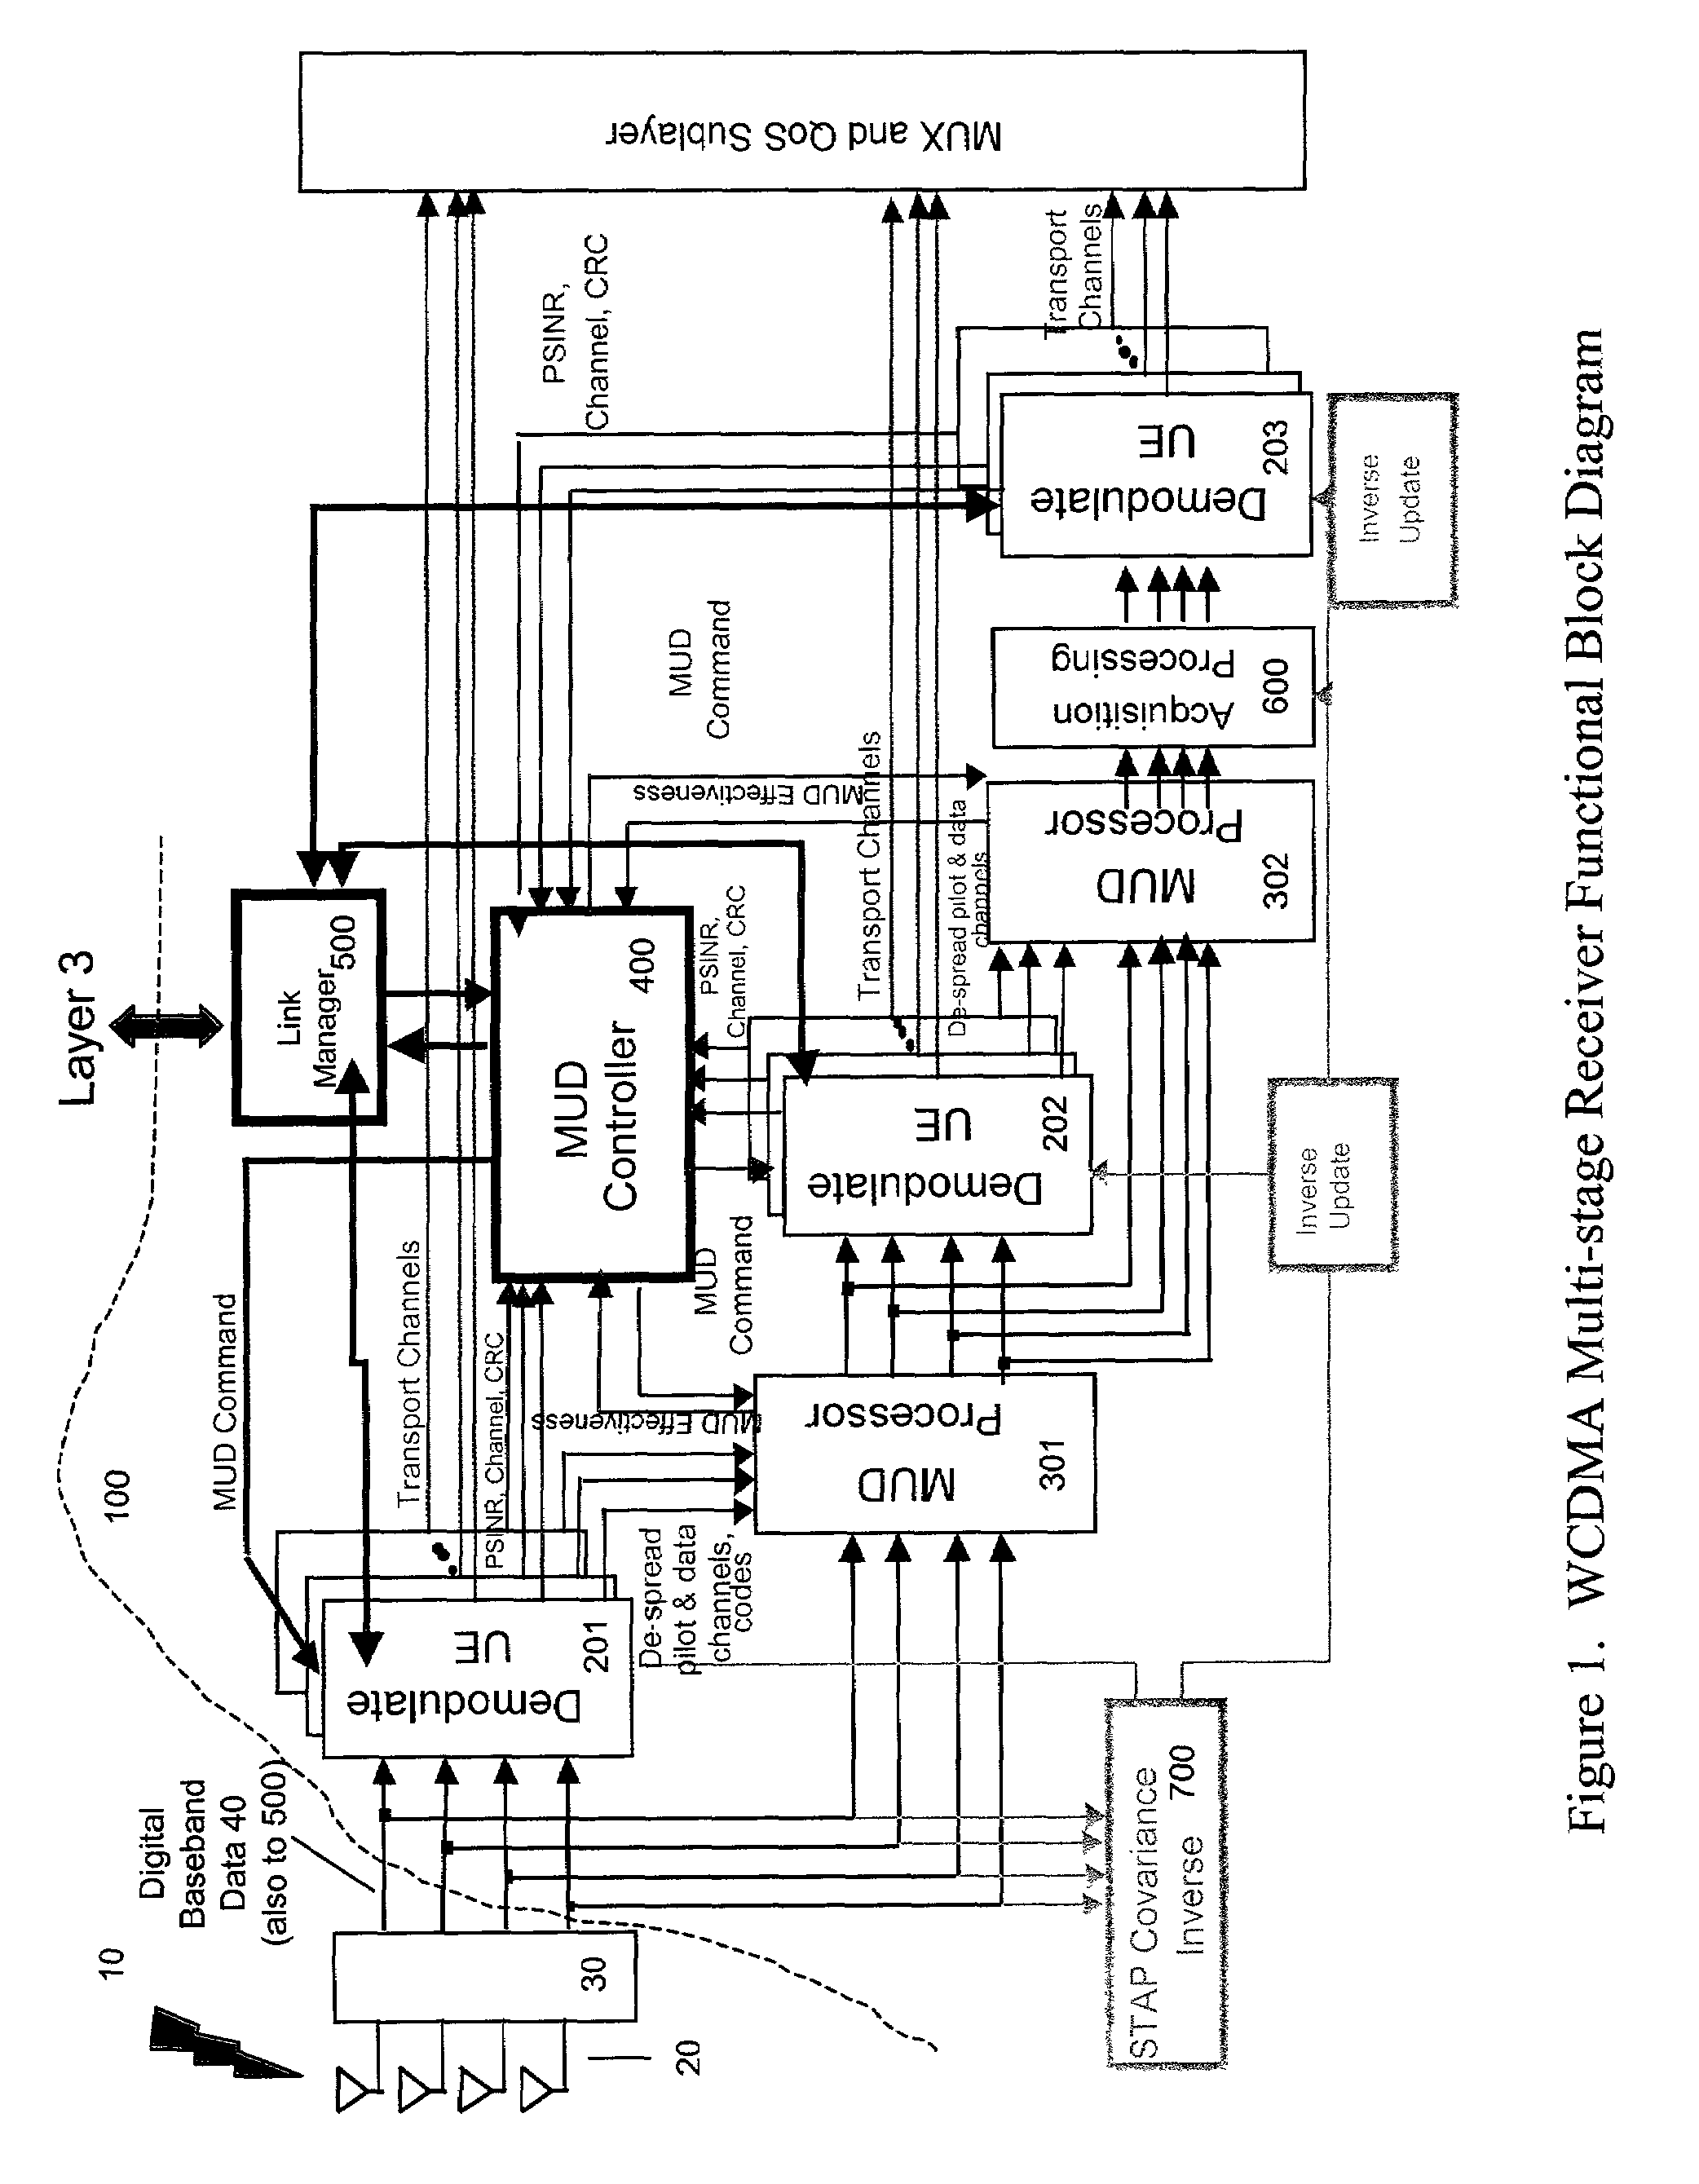 Multistage reception of code division multiple access transmissions